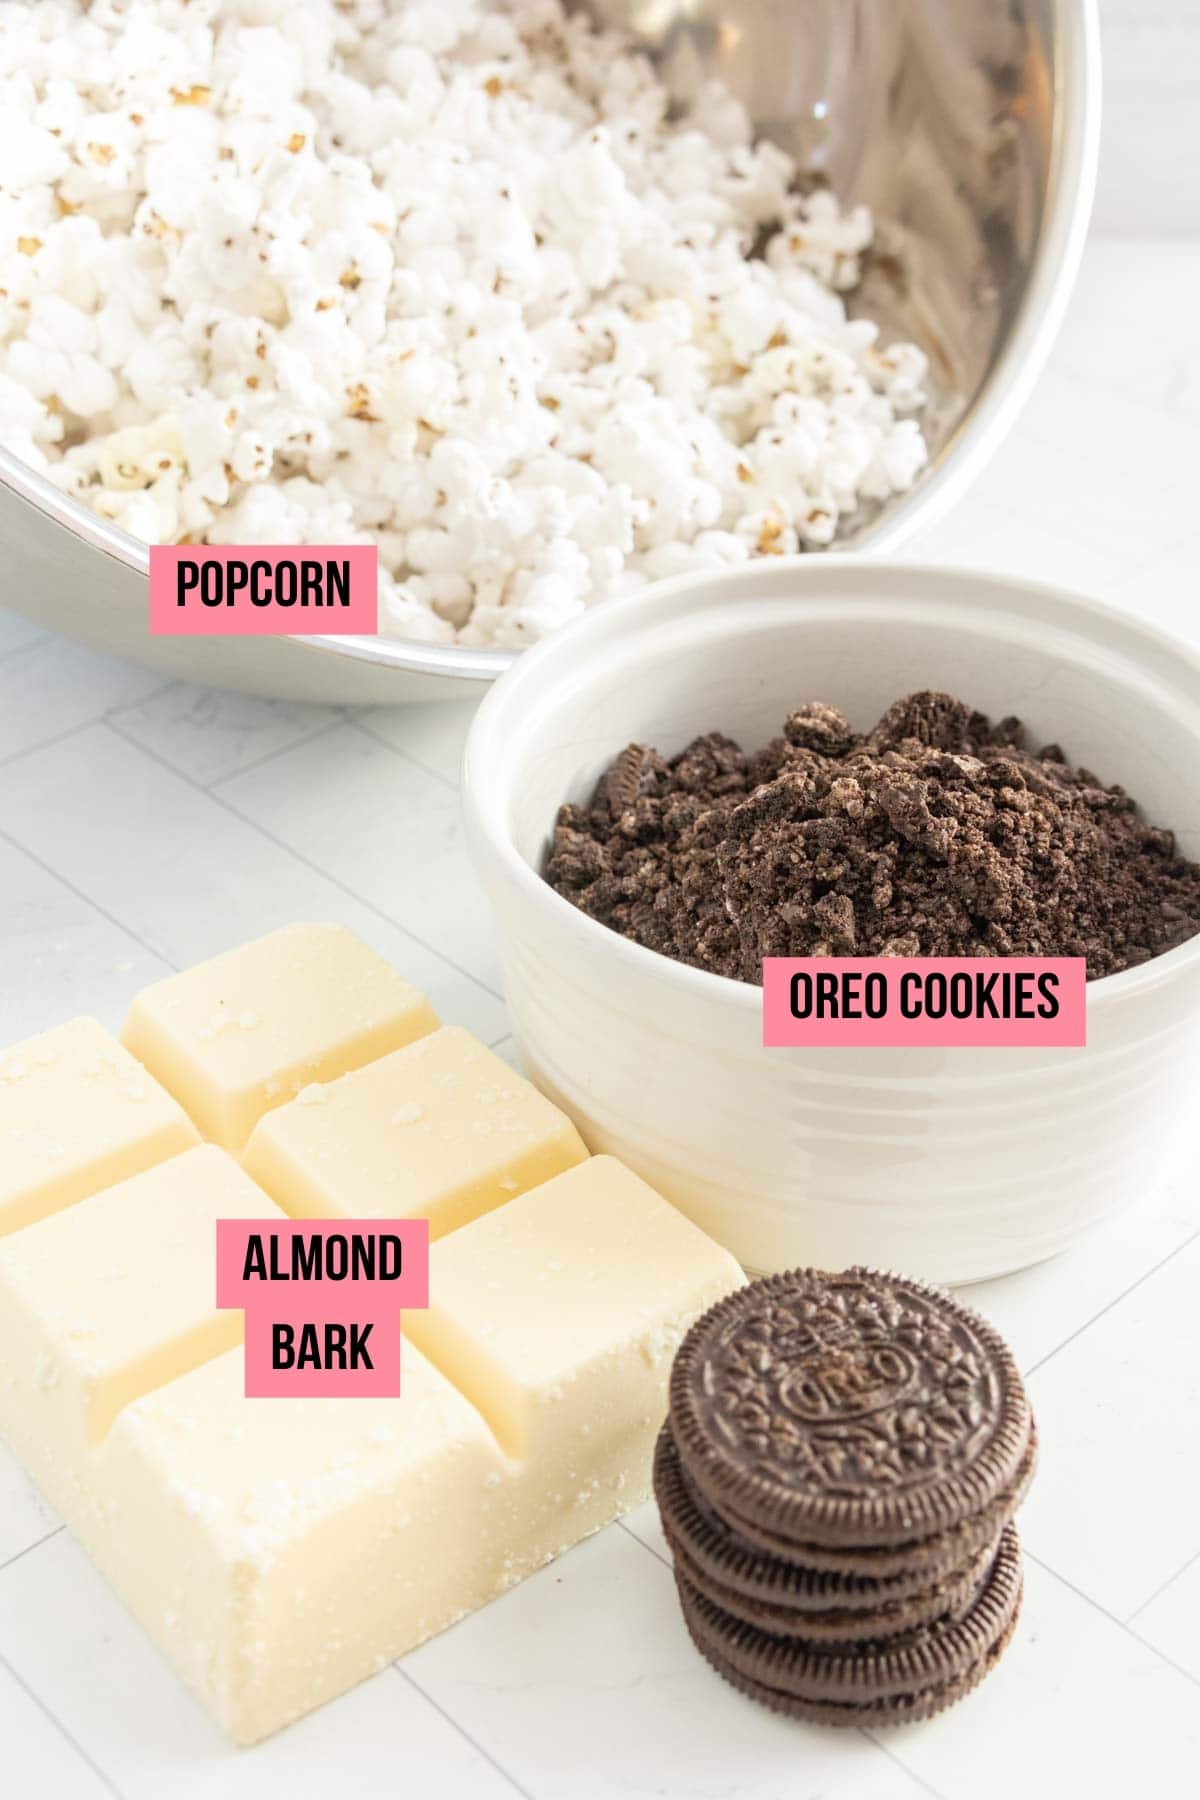 A bowl of popcorn, oreos, almond bark, and chocolate cookie crumbs.